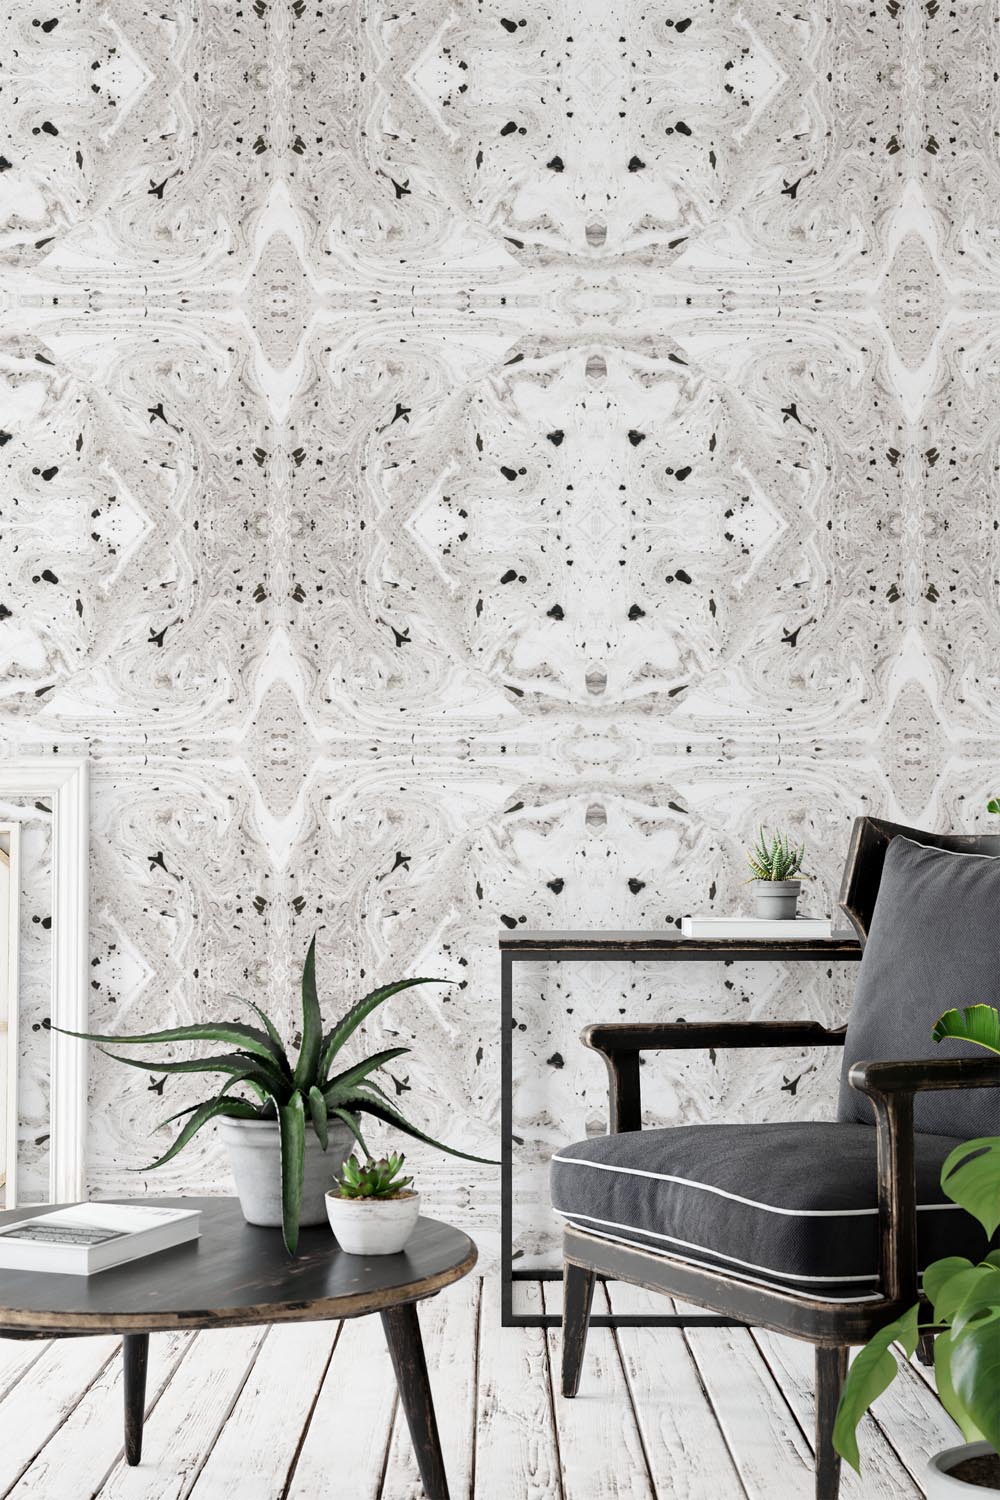 Marbled Paper Soot Made-to-Measure Wallpaper Waterproof for Rooms Bathroom Kitchen - USTAD HOME